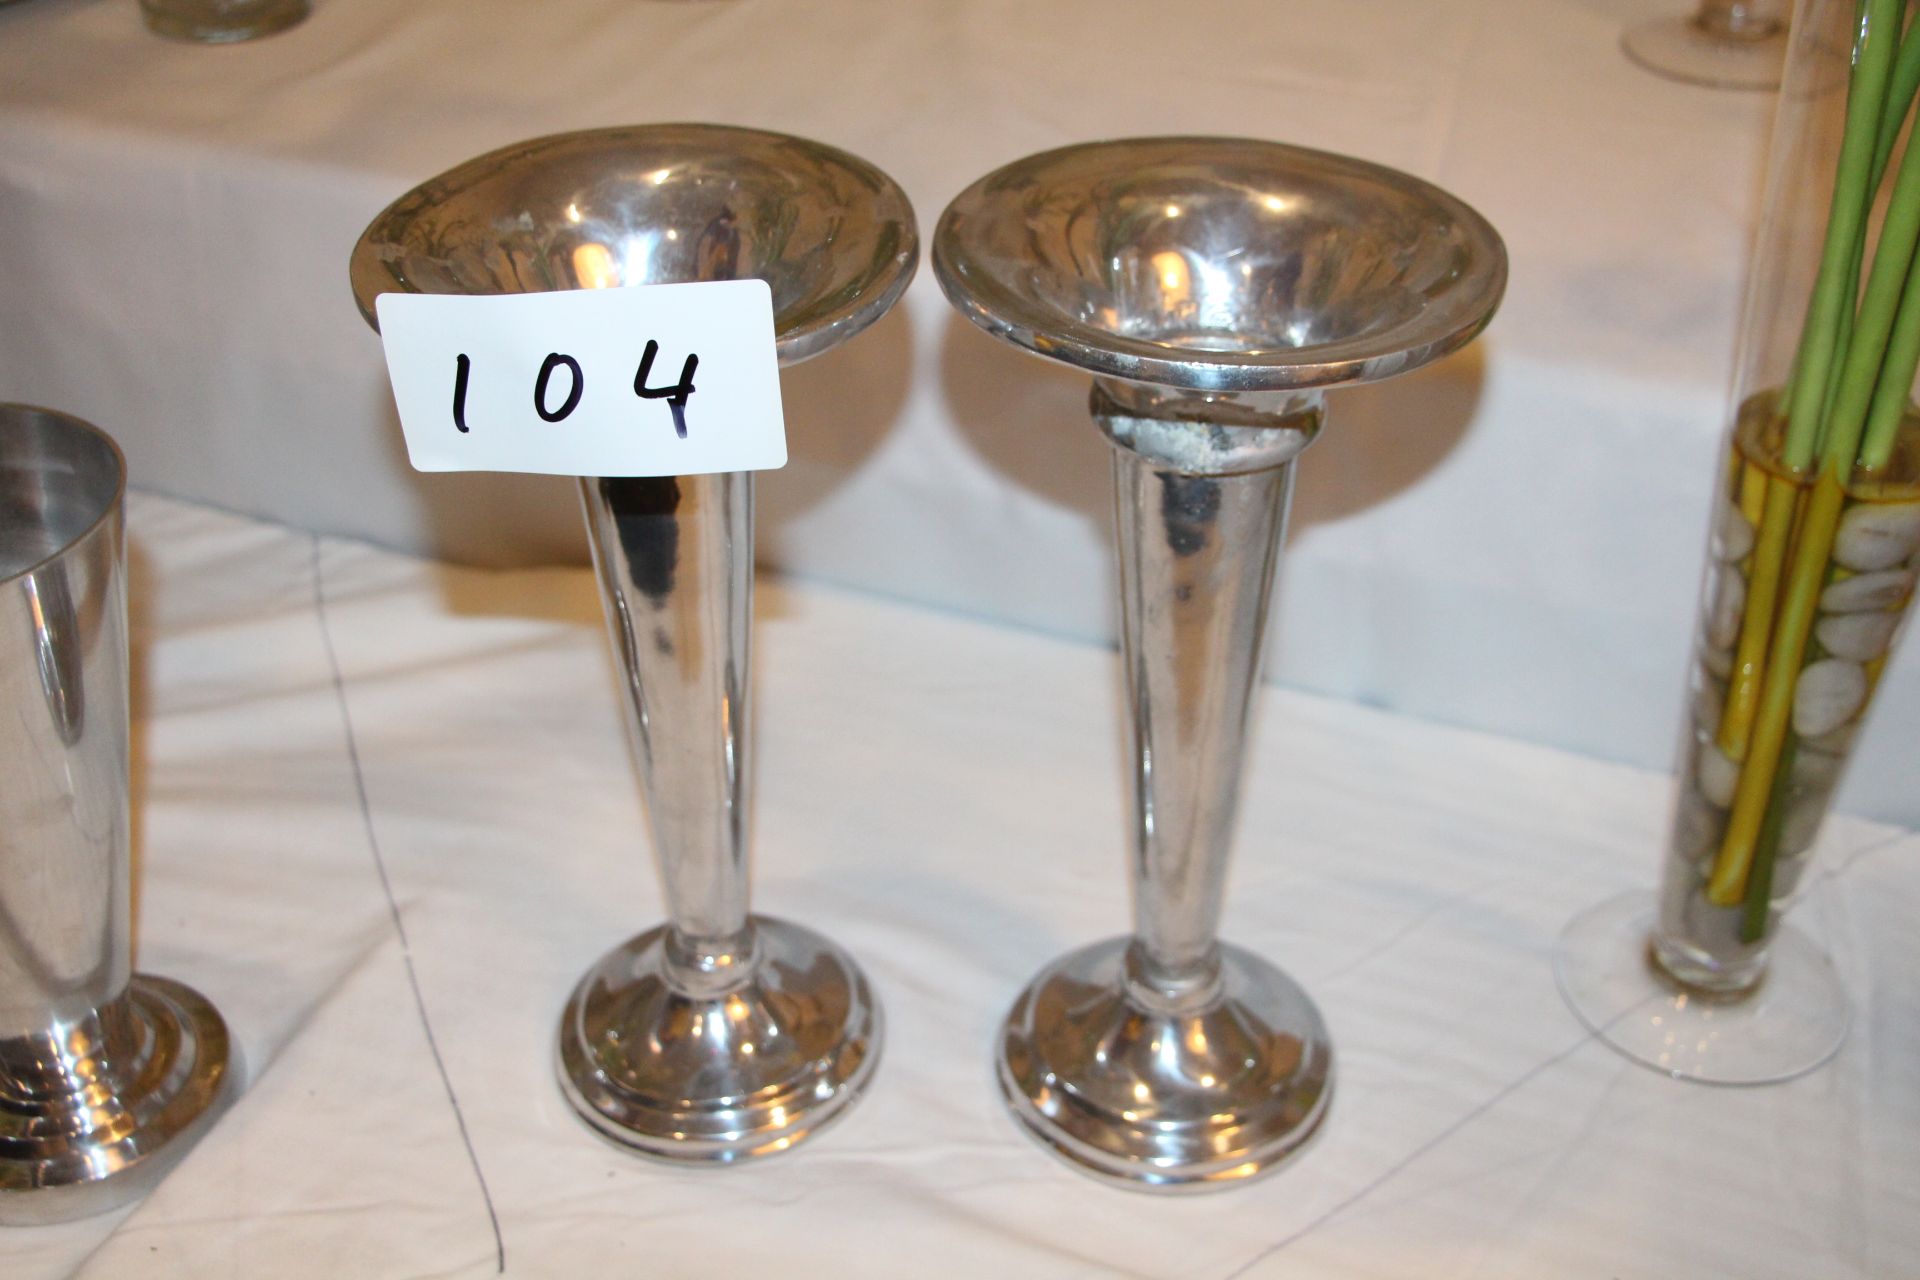 Lot 2 silver color candle holder